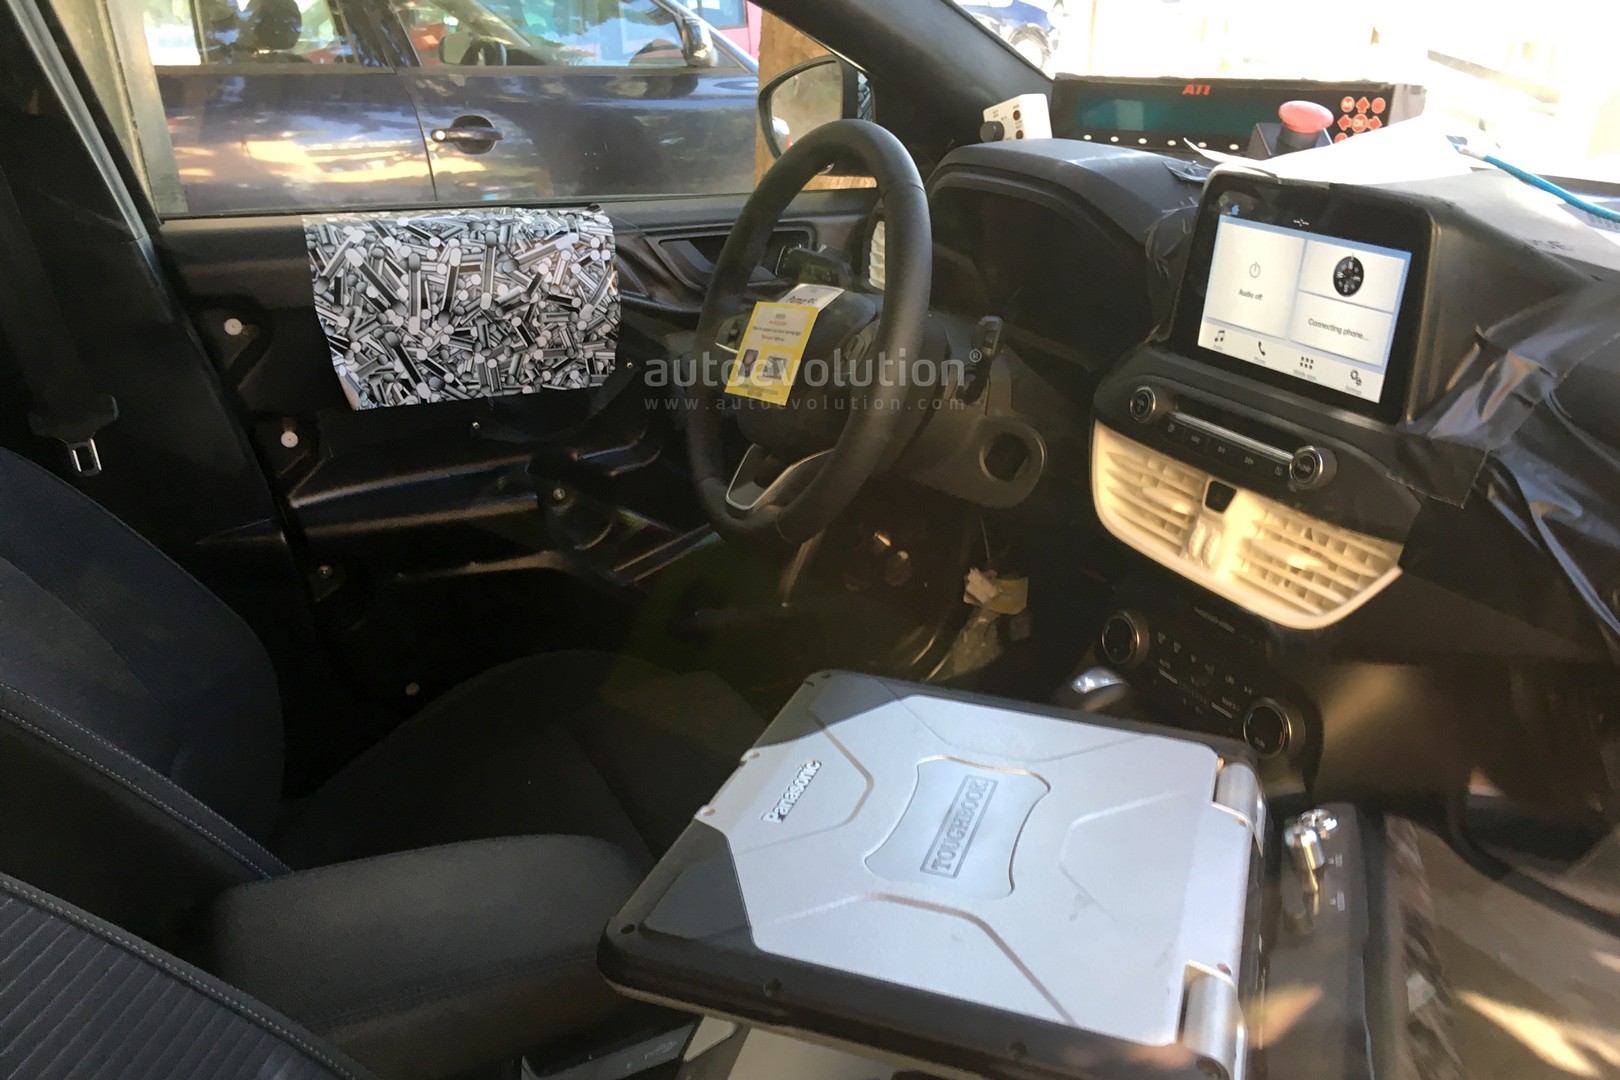 2019-ford-focus-interior-spied-in-detail